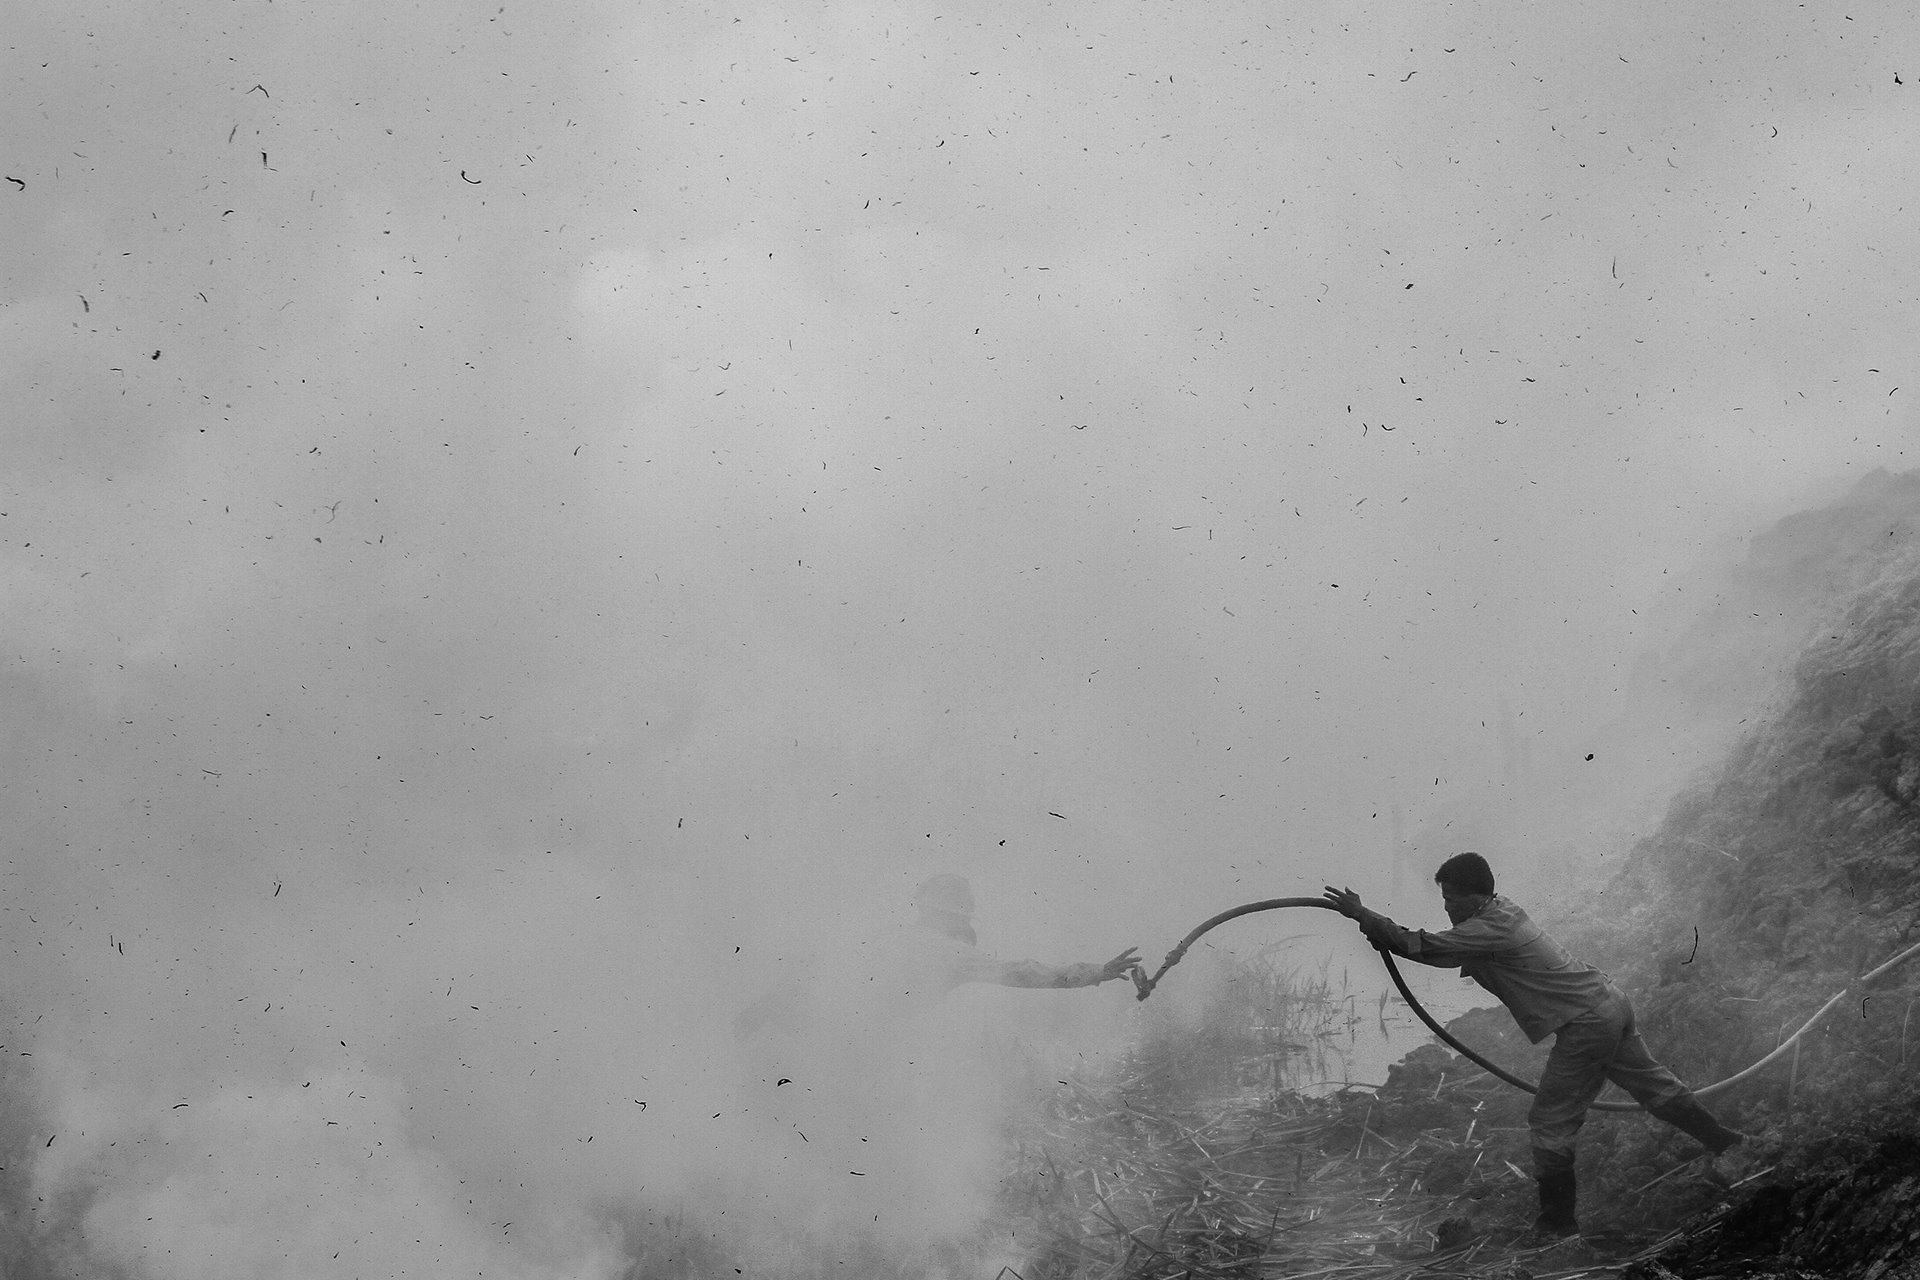 A firefighter throws another a hose, while attempting to extinguish a fire in Ogan Ilir, South Sumatra.